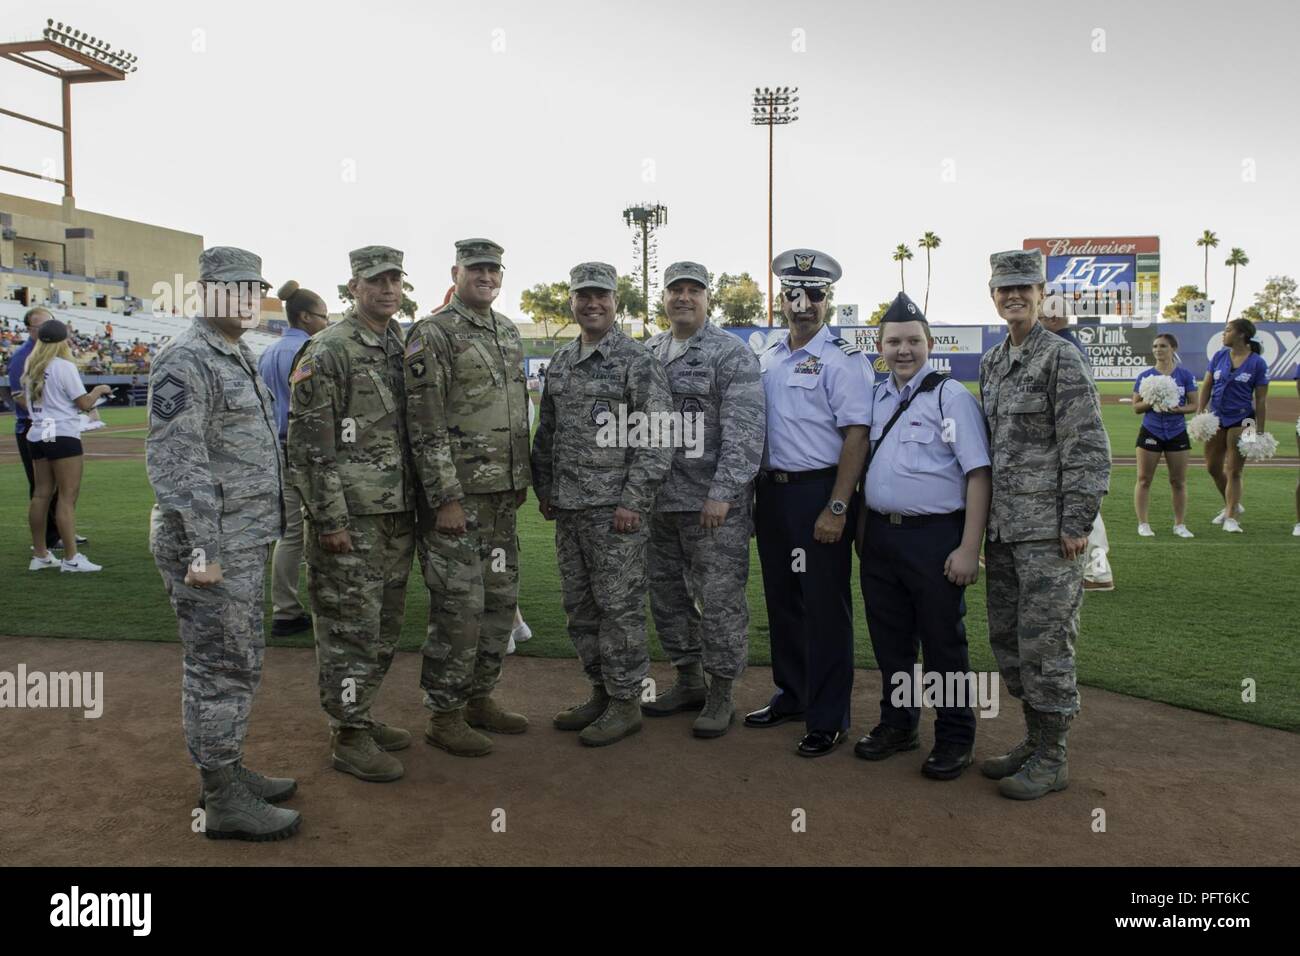 Active duty, guard and auxiliary members of the U.S. Armed Forces pose for  a photograph on the infield of Cashman Field during Military Appreciation  Night Stock Photo - Alamy